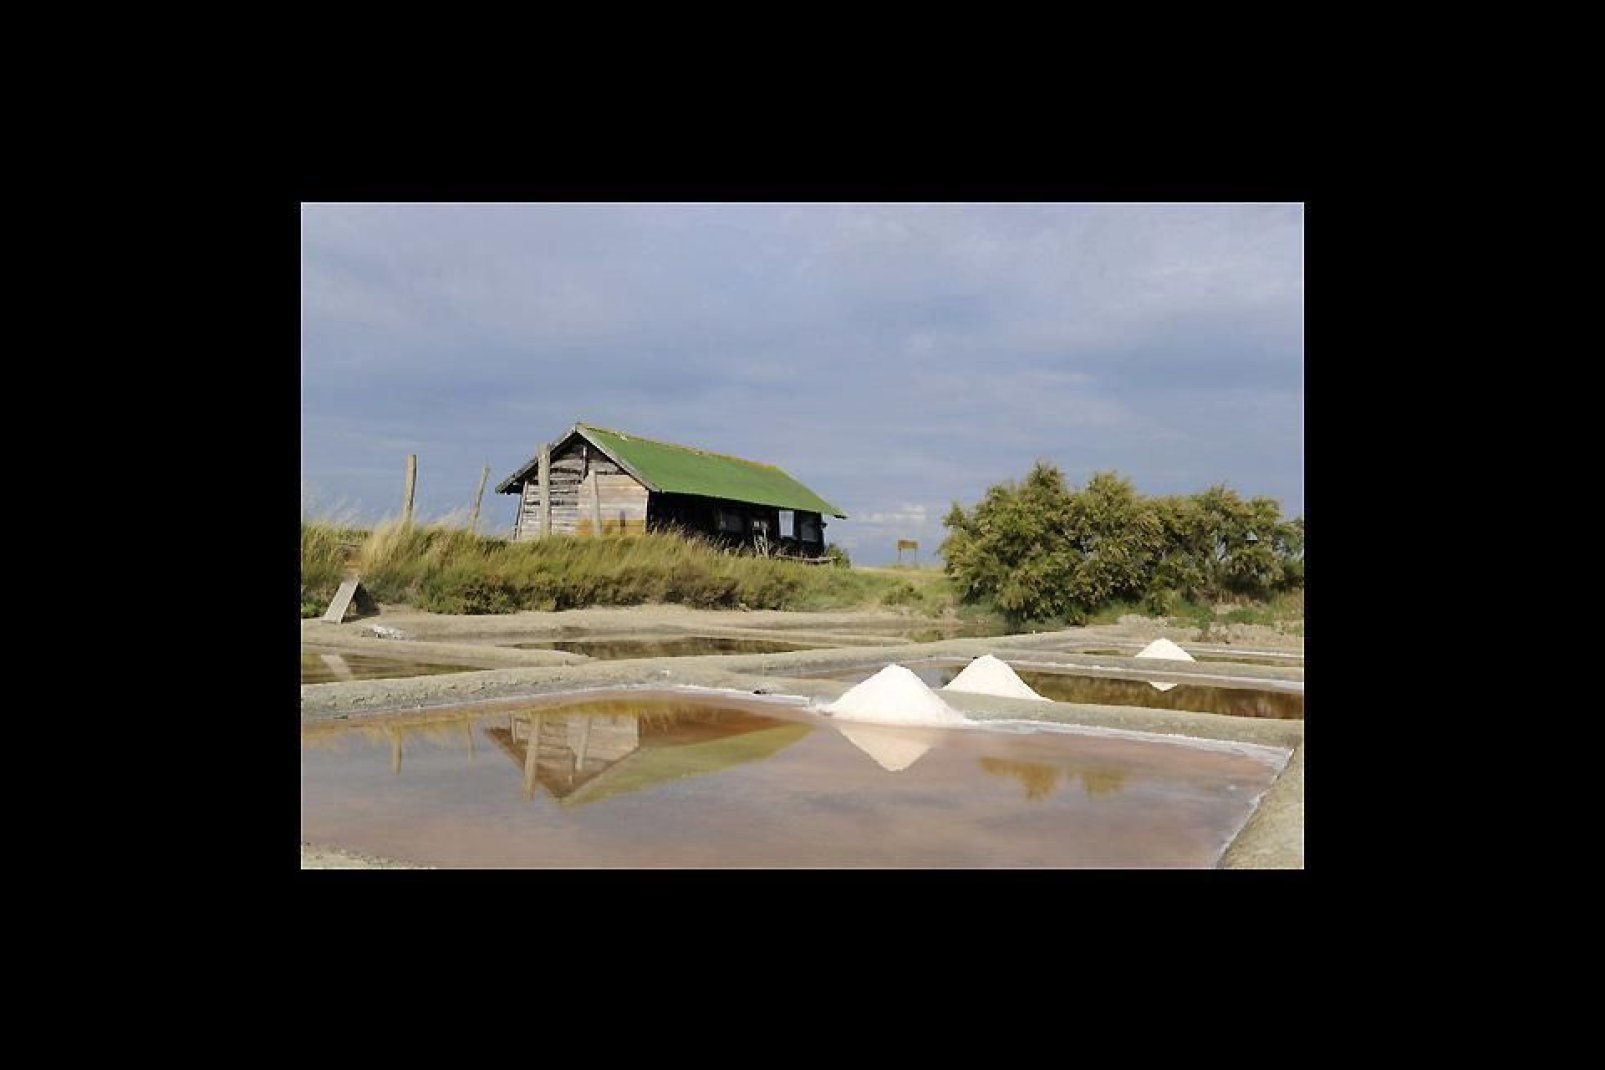 A couple of miles north of the town, the Saltworks are a protected natural zone where you can see the workers harvesting the salt.